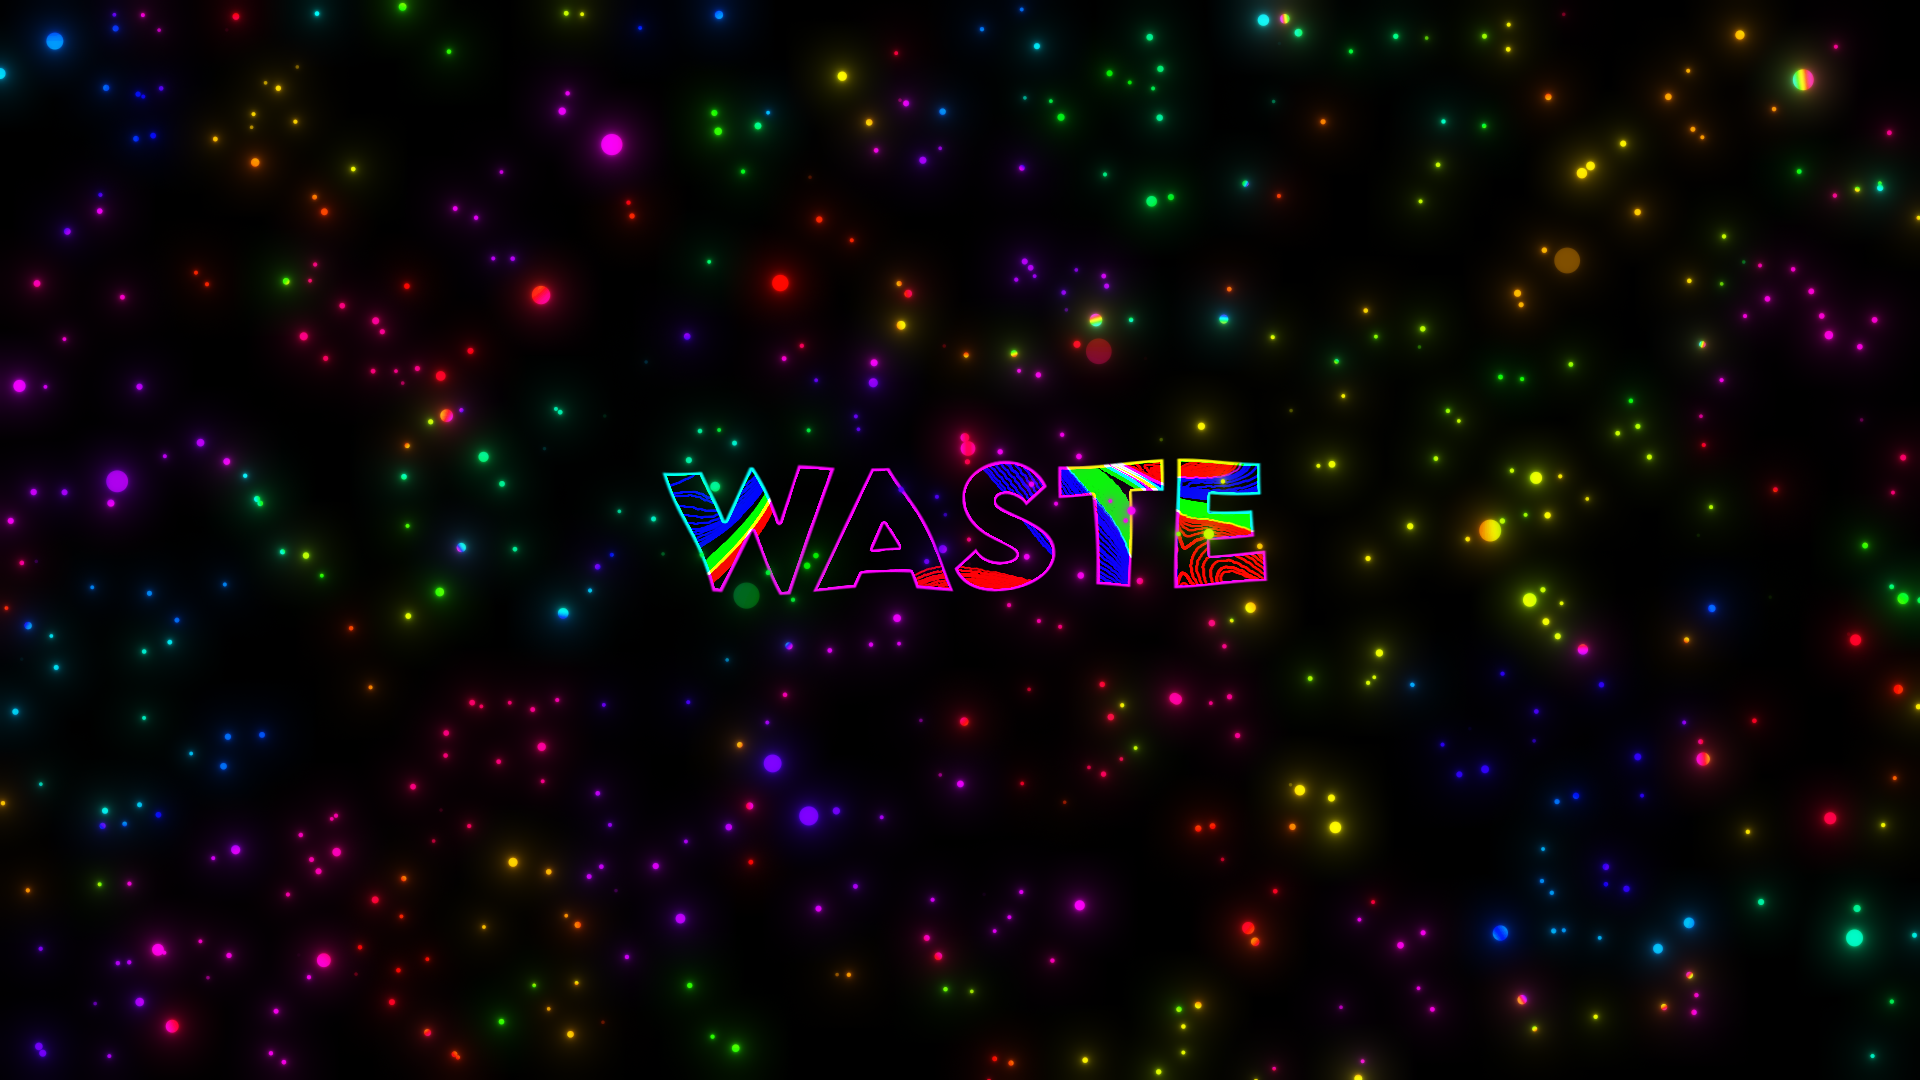 Intro song: Waste